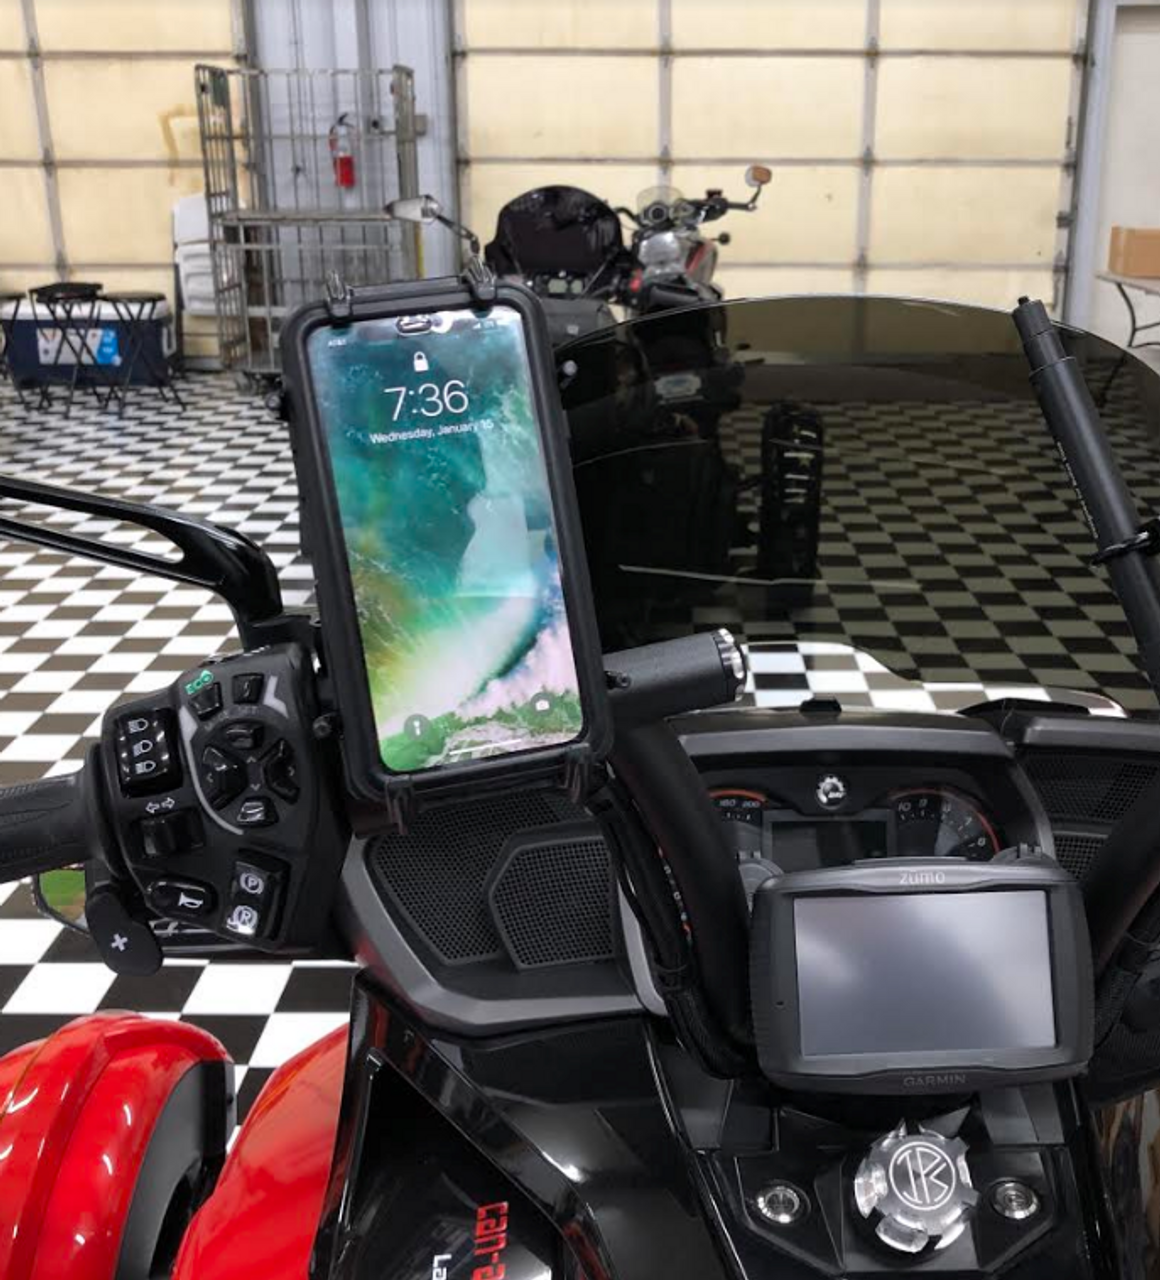 RAM® Quick-Grip™ Universal Phone Holder with Ball (RAM-PD3-238AU)
Bike Mount Sold Separately 